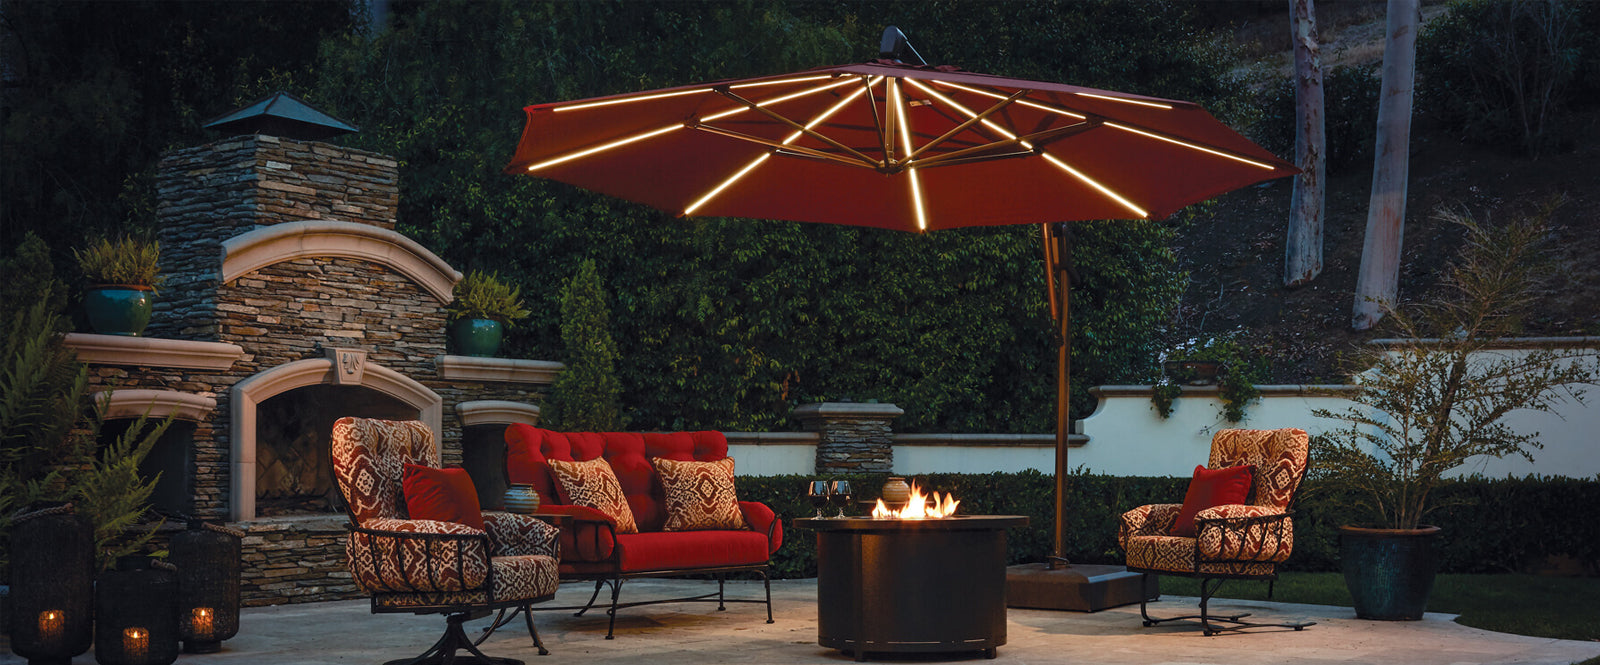 Patio Accessories such as Umbrellas and Firepits to compliment any style.